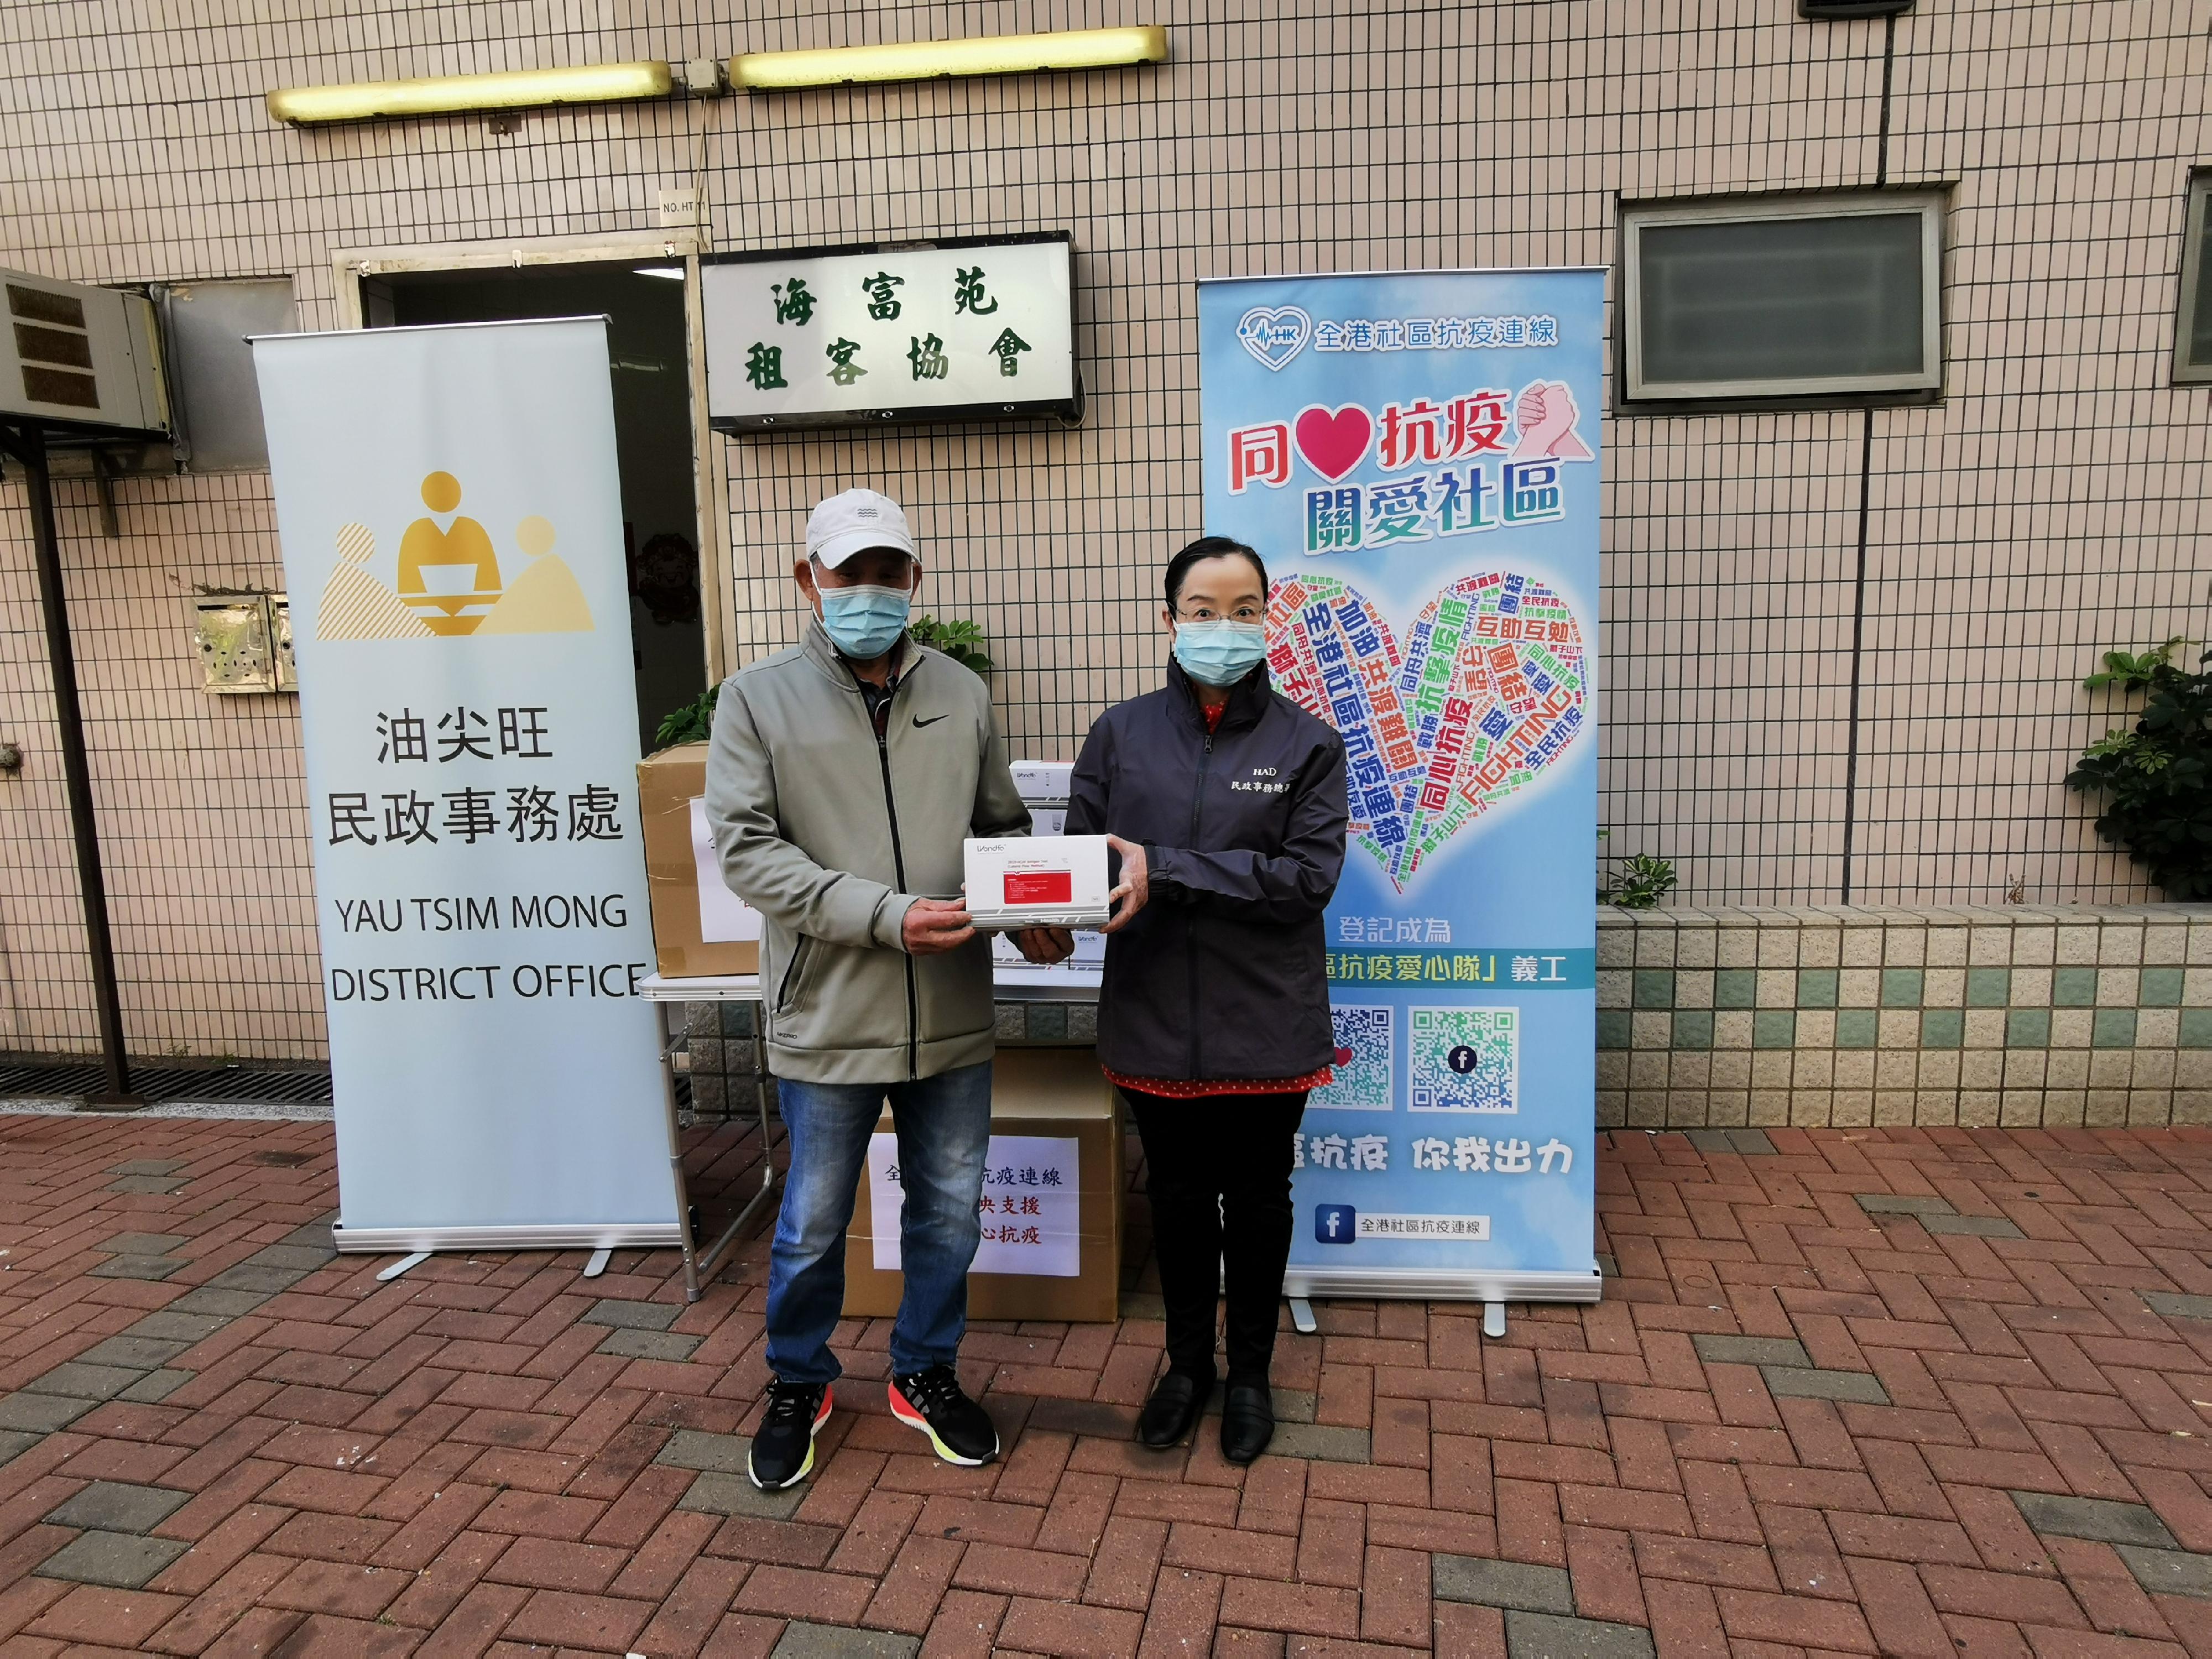 The Acting Director of Home Affairs, Miss Vega Wong (right), distributed COVID-19 rapid test kits to Yau Tsim Mong residents at Hoi Fu Court on February 27.